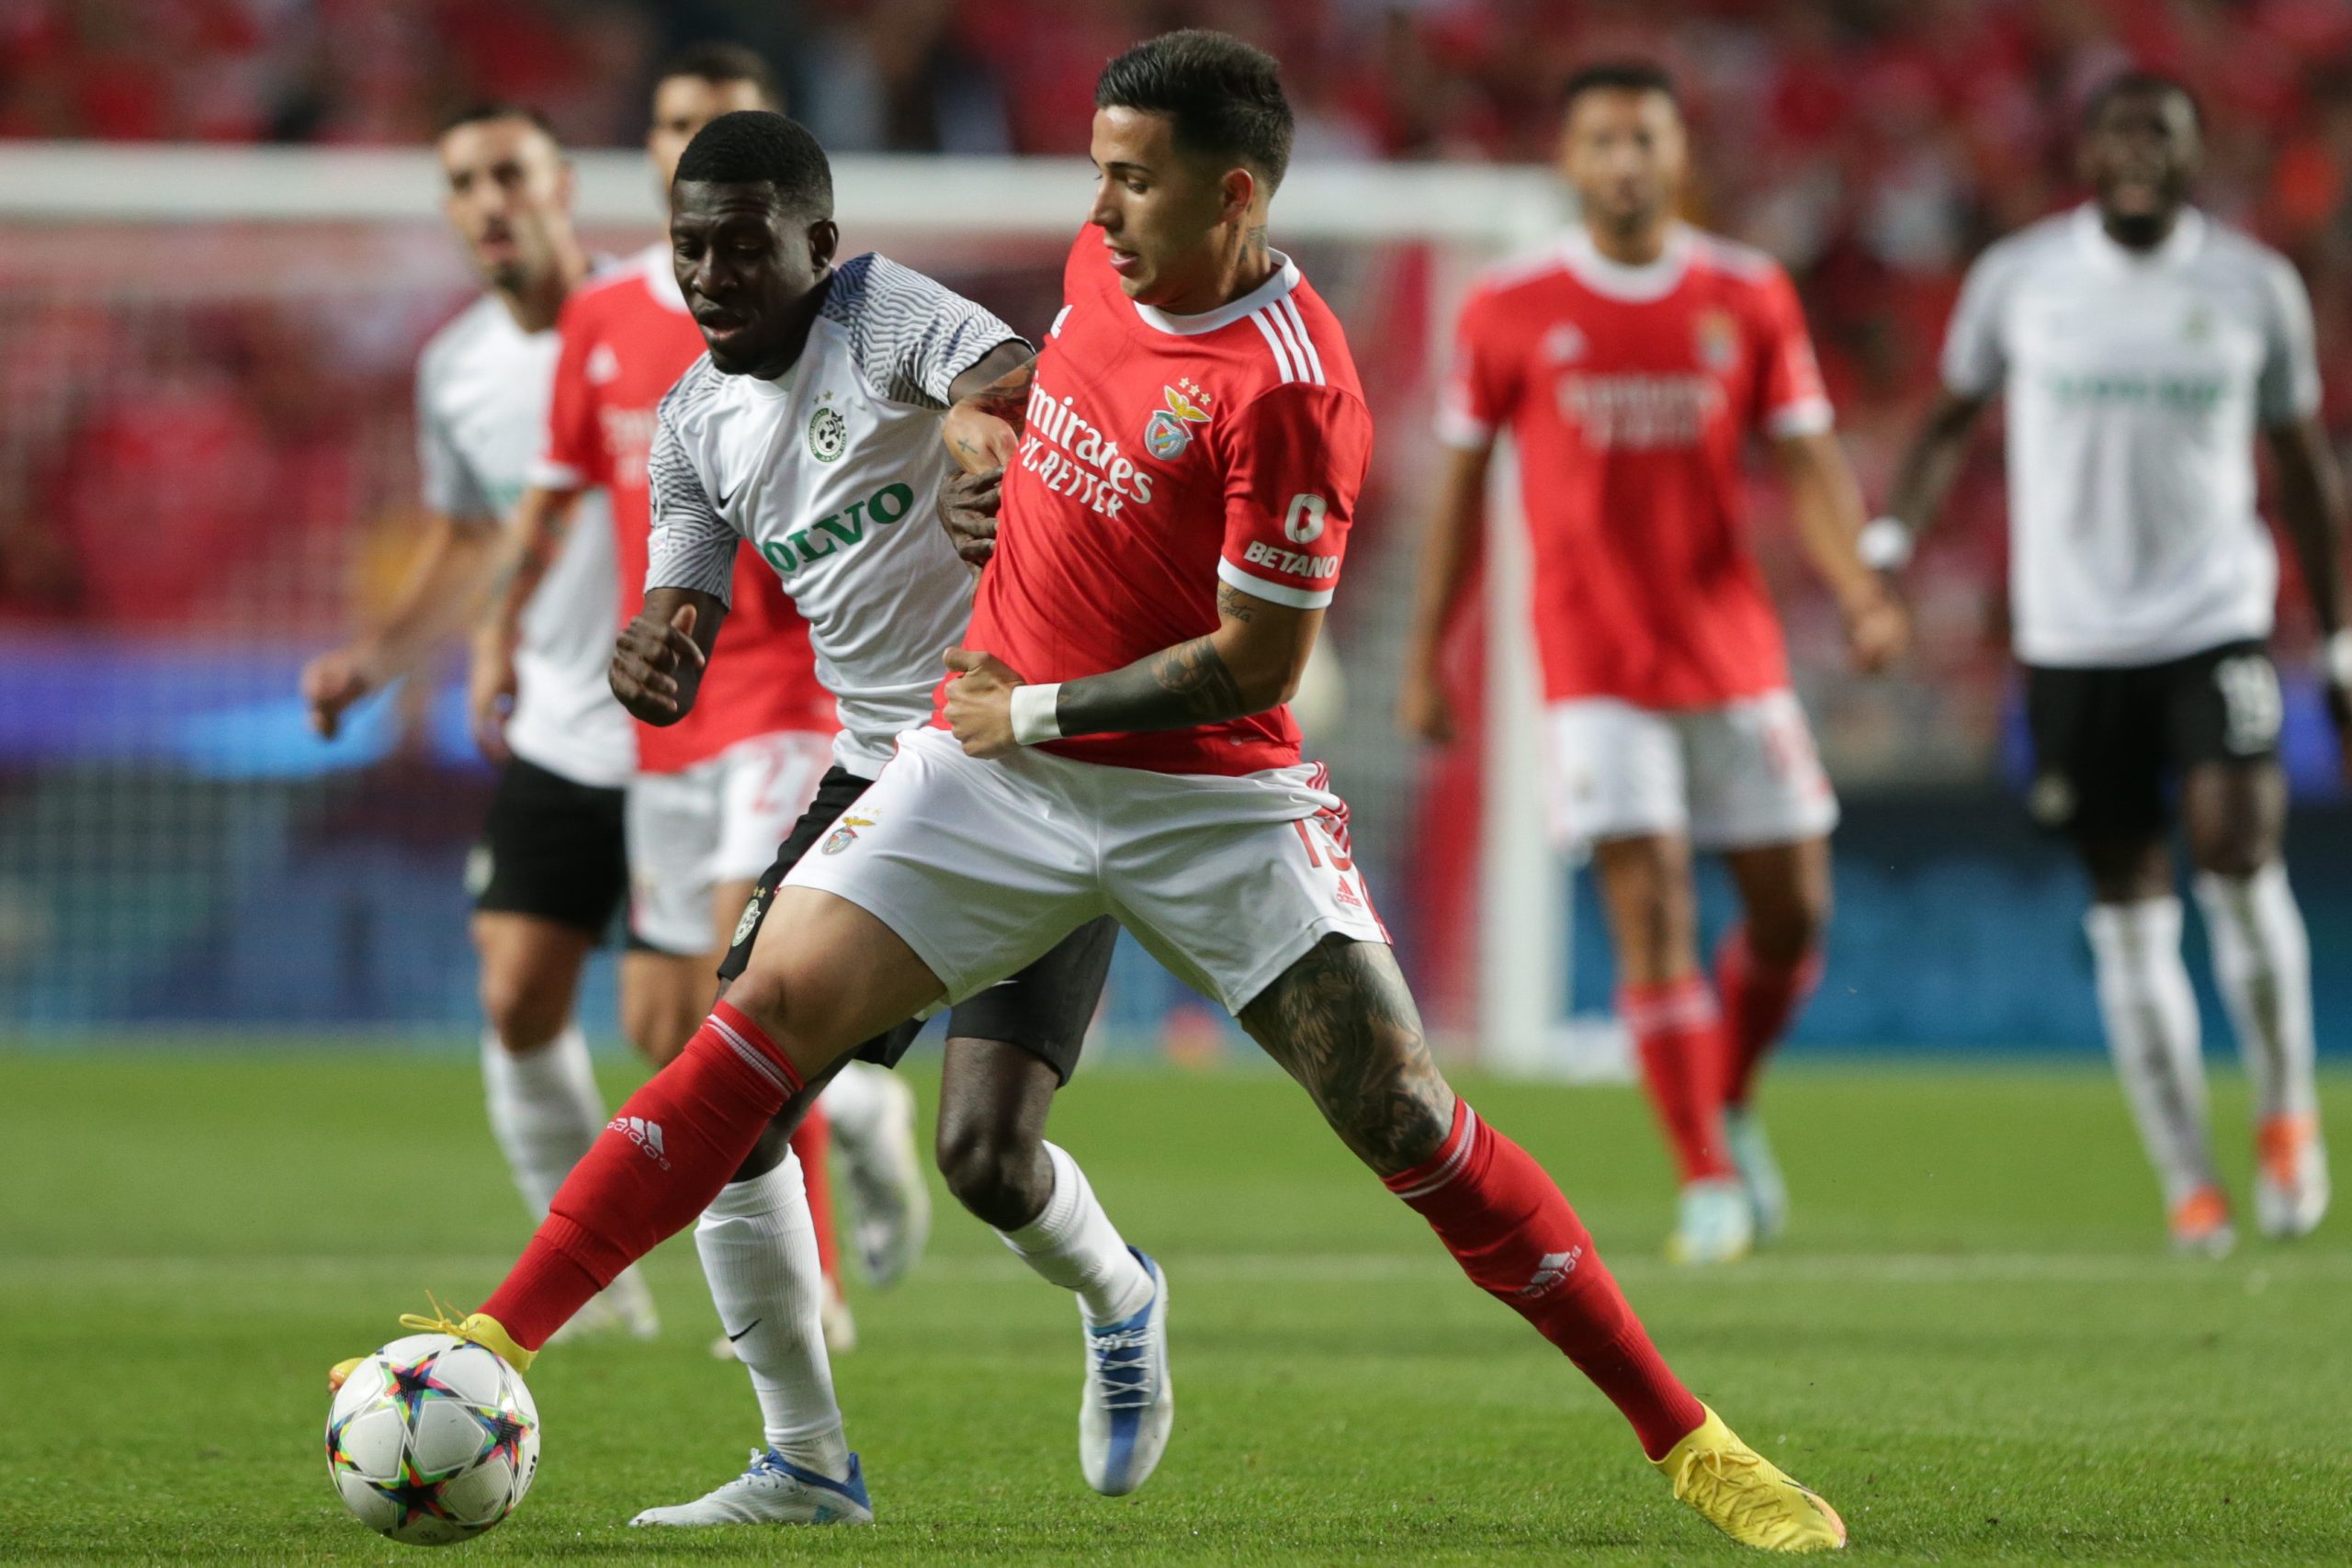 epa10165178 Benfica's Enzo Fernandez (C) in action against Haifa's Ali Mohamad (L) during the UEFA Champions League group H soccer match between SL Benfica and Maccabi Haifa in Lisbon, Portugal, 06 September 2022.  EPA/TIAGO PETINGA